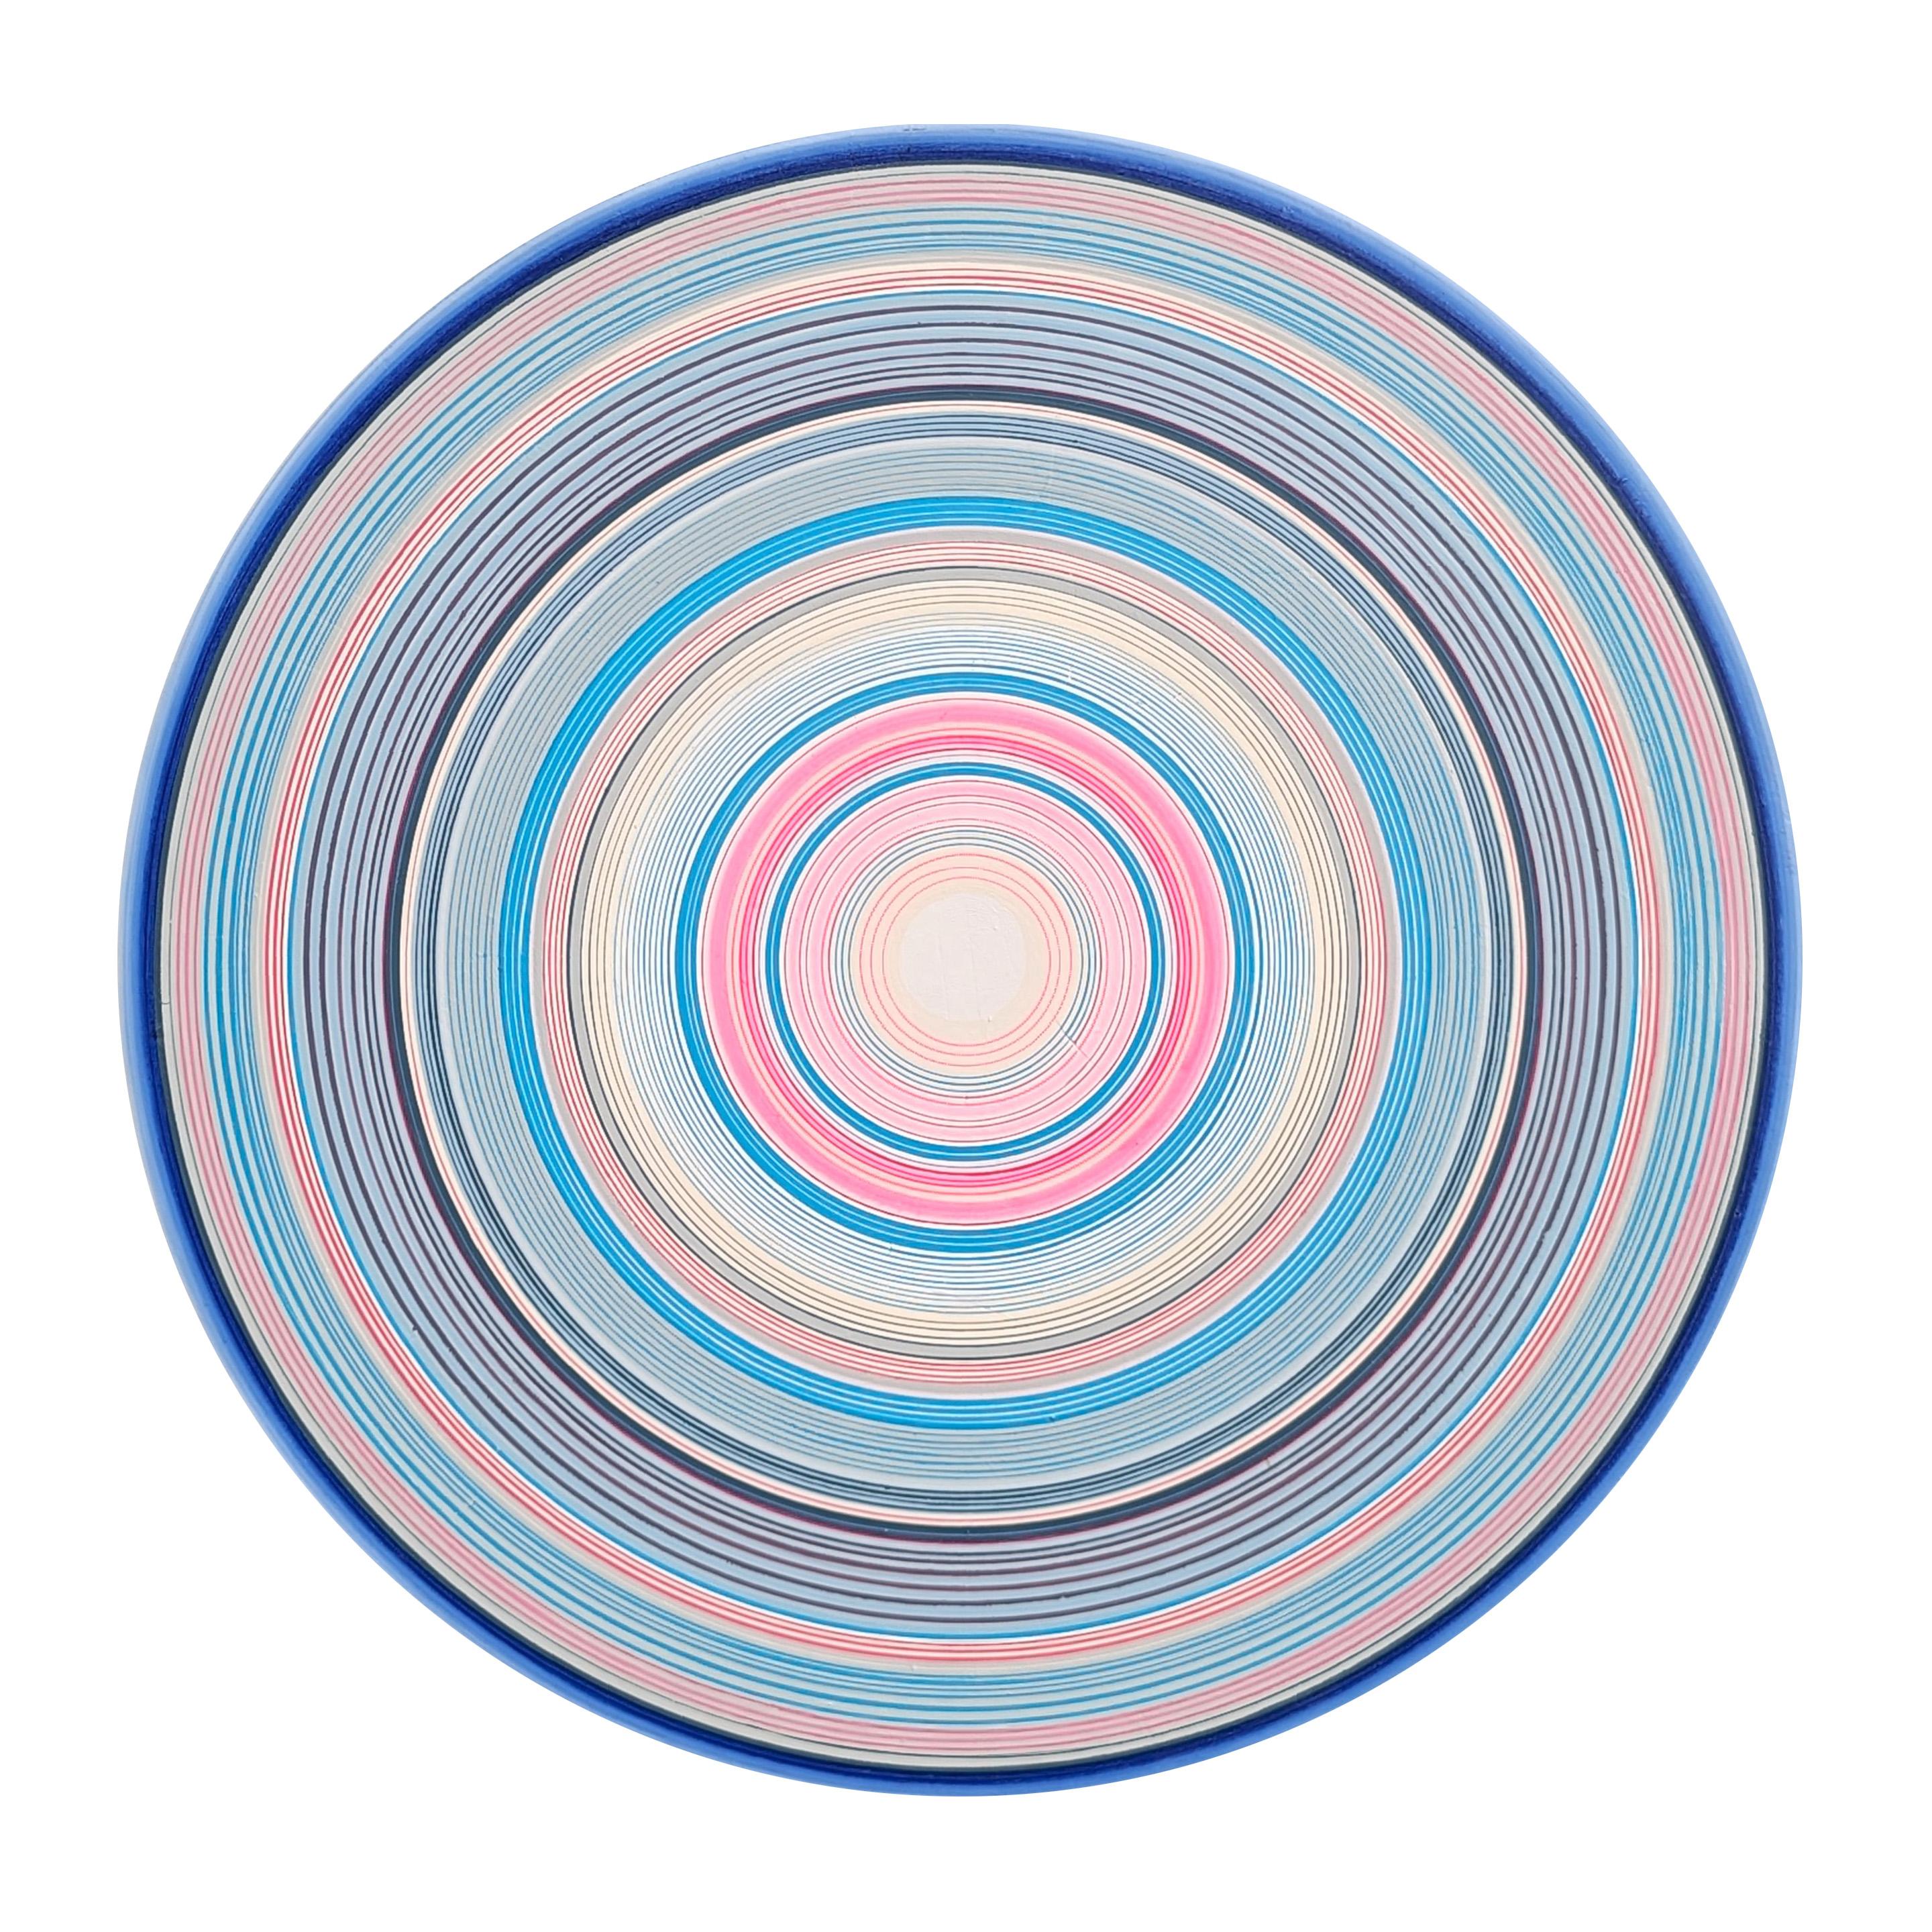 "Threads" Contemporary Abstract Blue, Pink, & White Concentric Circle Painting – Mixed Media Art von David Hardaker